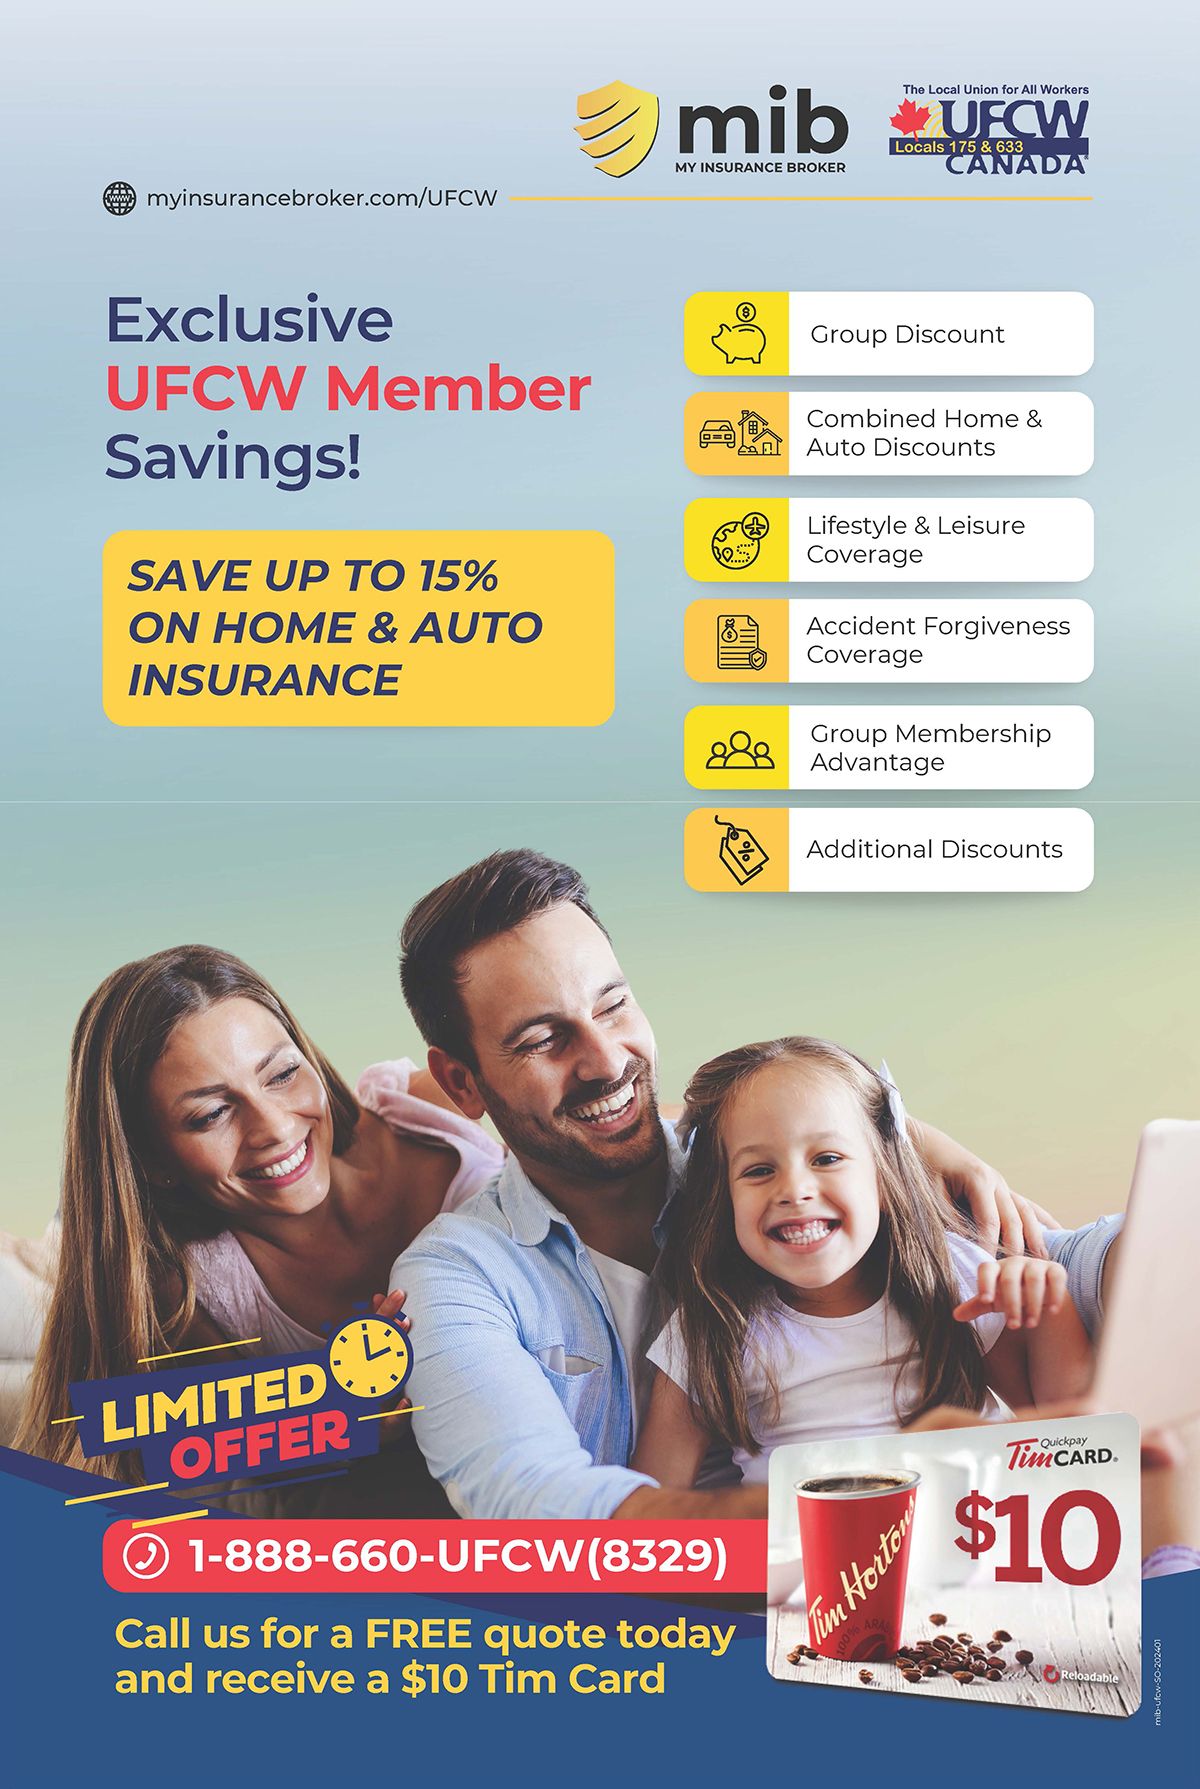 Exclusive UFCW Savings! Save up to 15% On Home & Auto Insurance